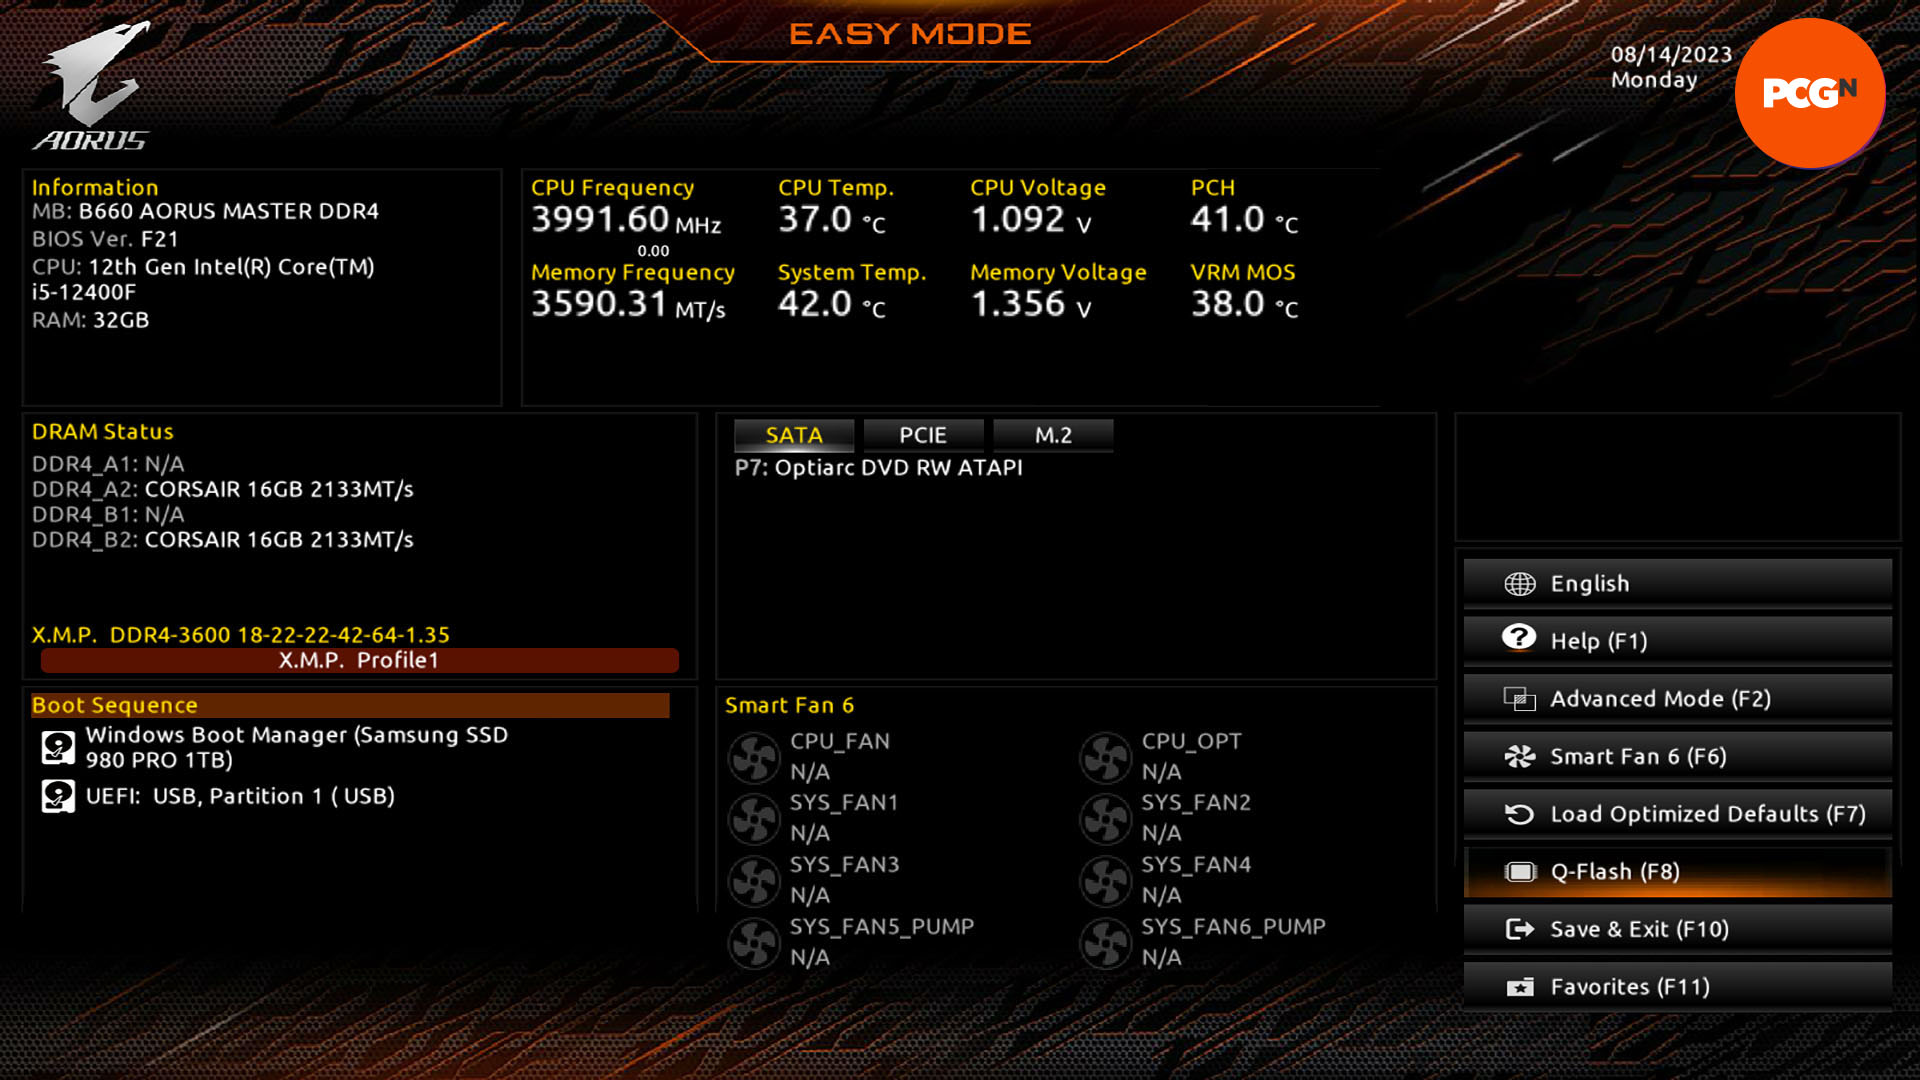 How to flash the BIOS on your PC motherboard: Gigabyte EFI Q-Flash Easy Mode